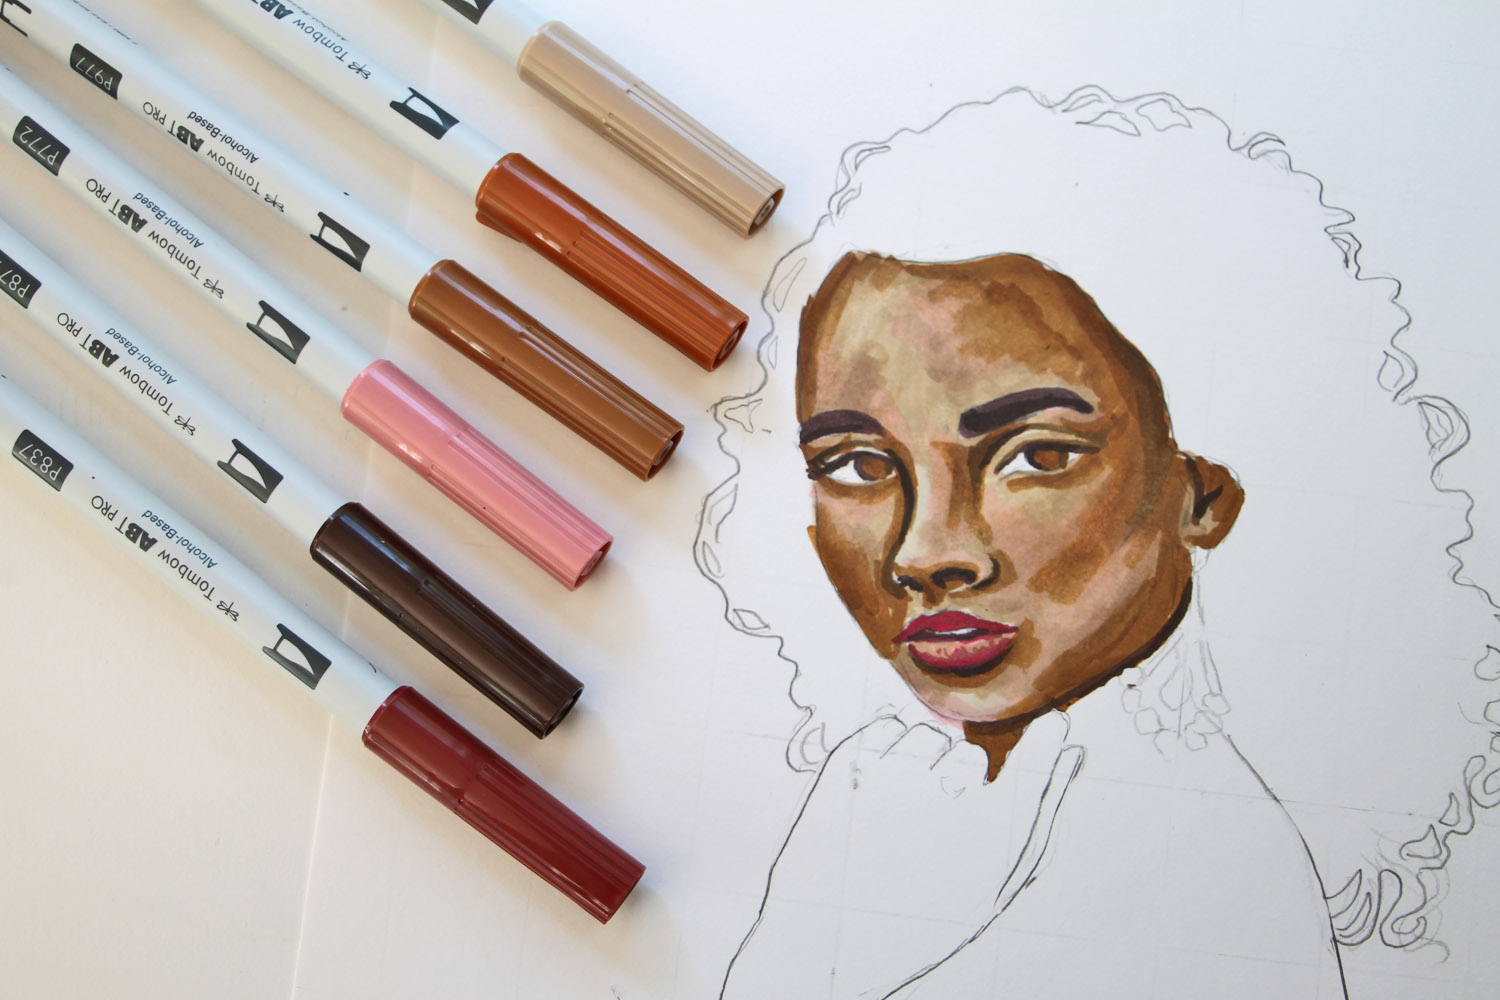 Introduction to Portrait Art Using The Grid Drawing Method - @studio.katie